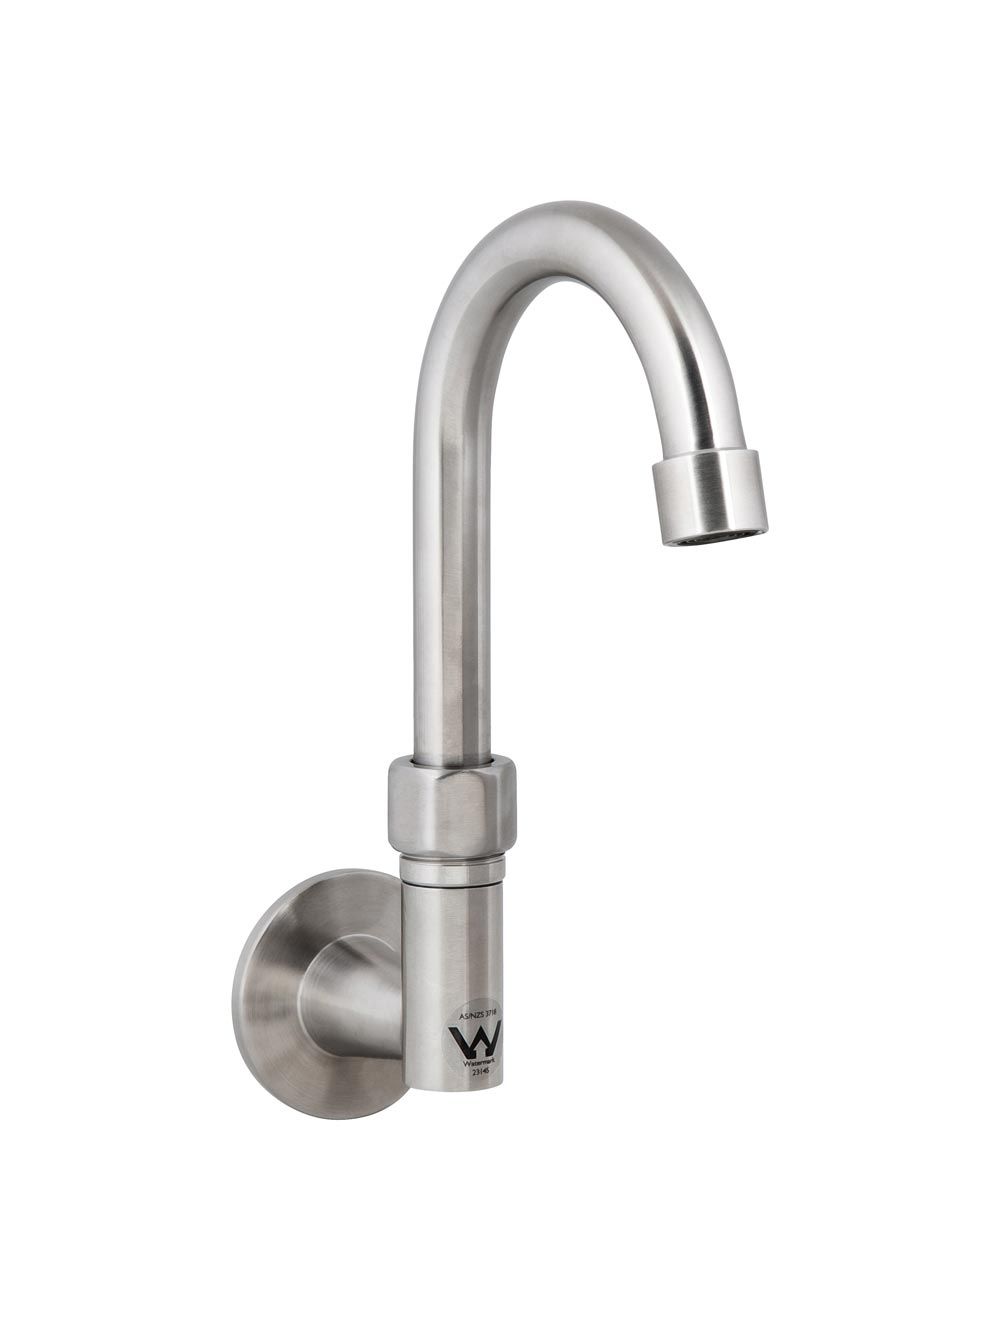 Stainless Steel Wall Elbow with Gooseneck Swivel Spout